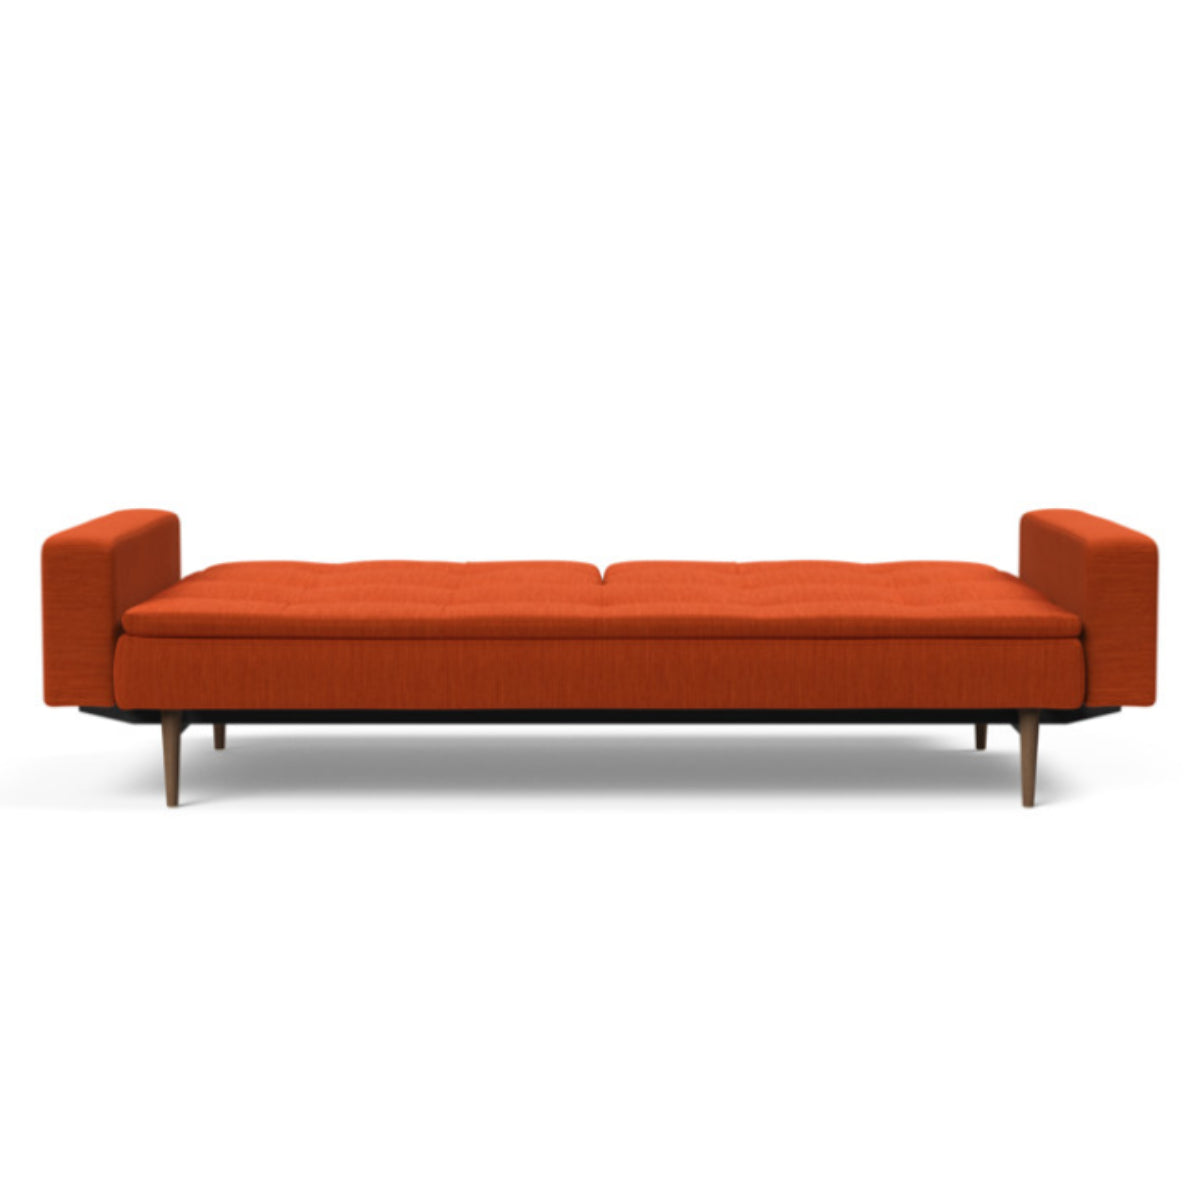 Dublexo Styletto Sofa Bed Dark Wood With Arms Daybed INNOVATION     Four Hands, Burke Decor, Mid Century Modern Furniture, Old Bones Furniture Company, Old Bones Co, Modern Mid Century, Designer Furniture, https://www.oldbonesco.com/